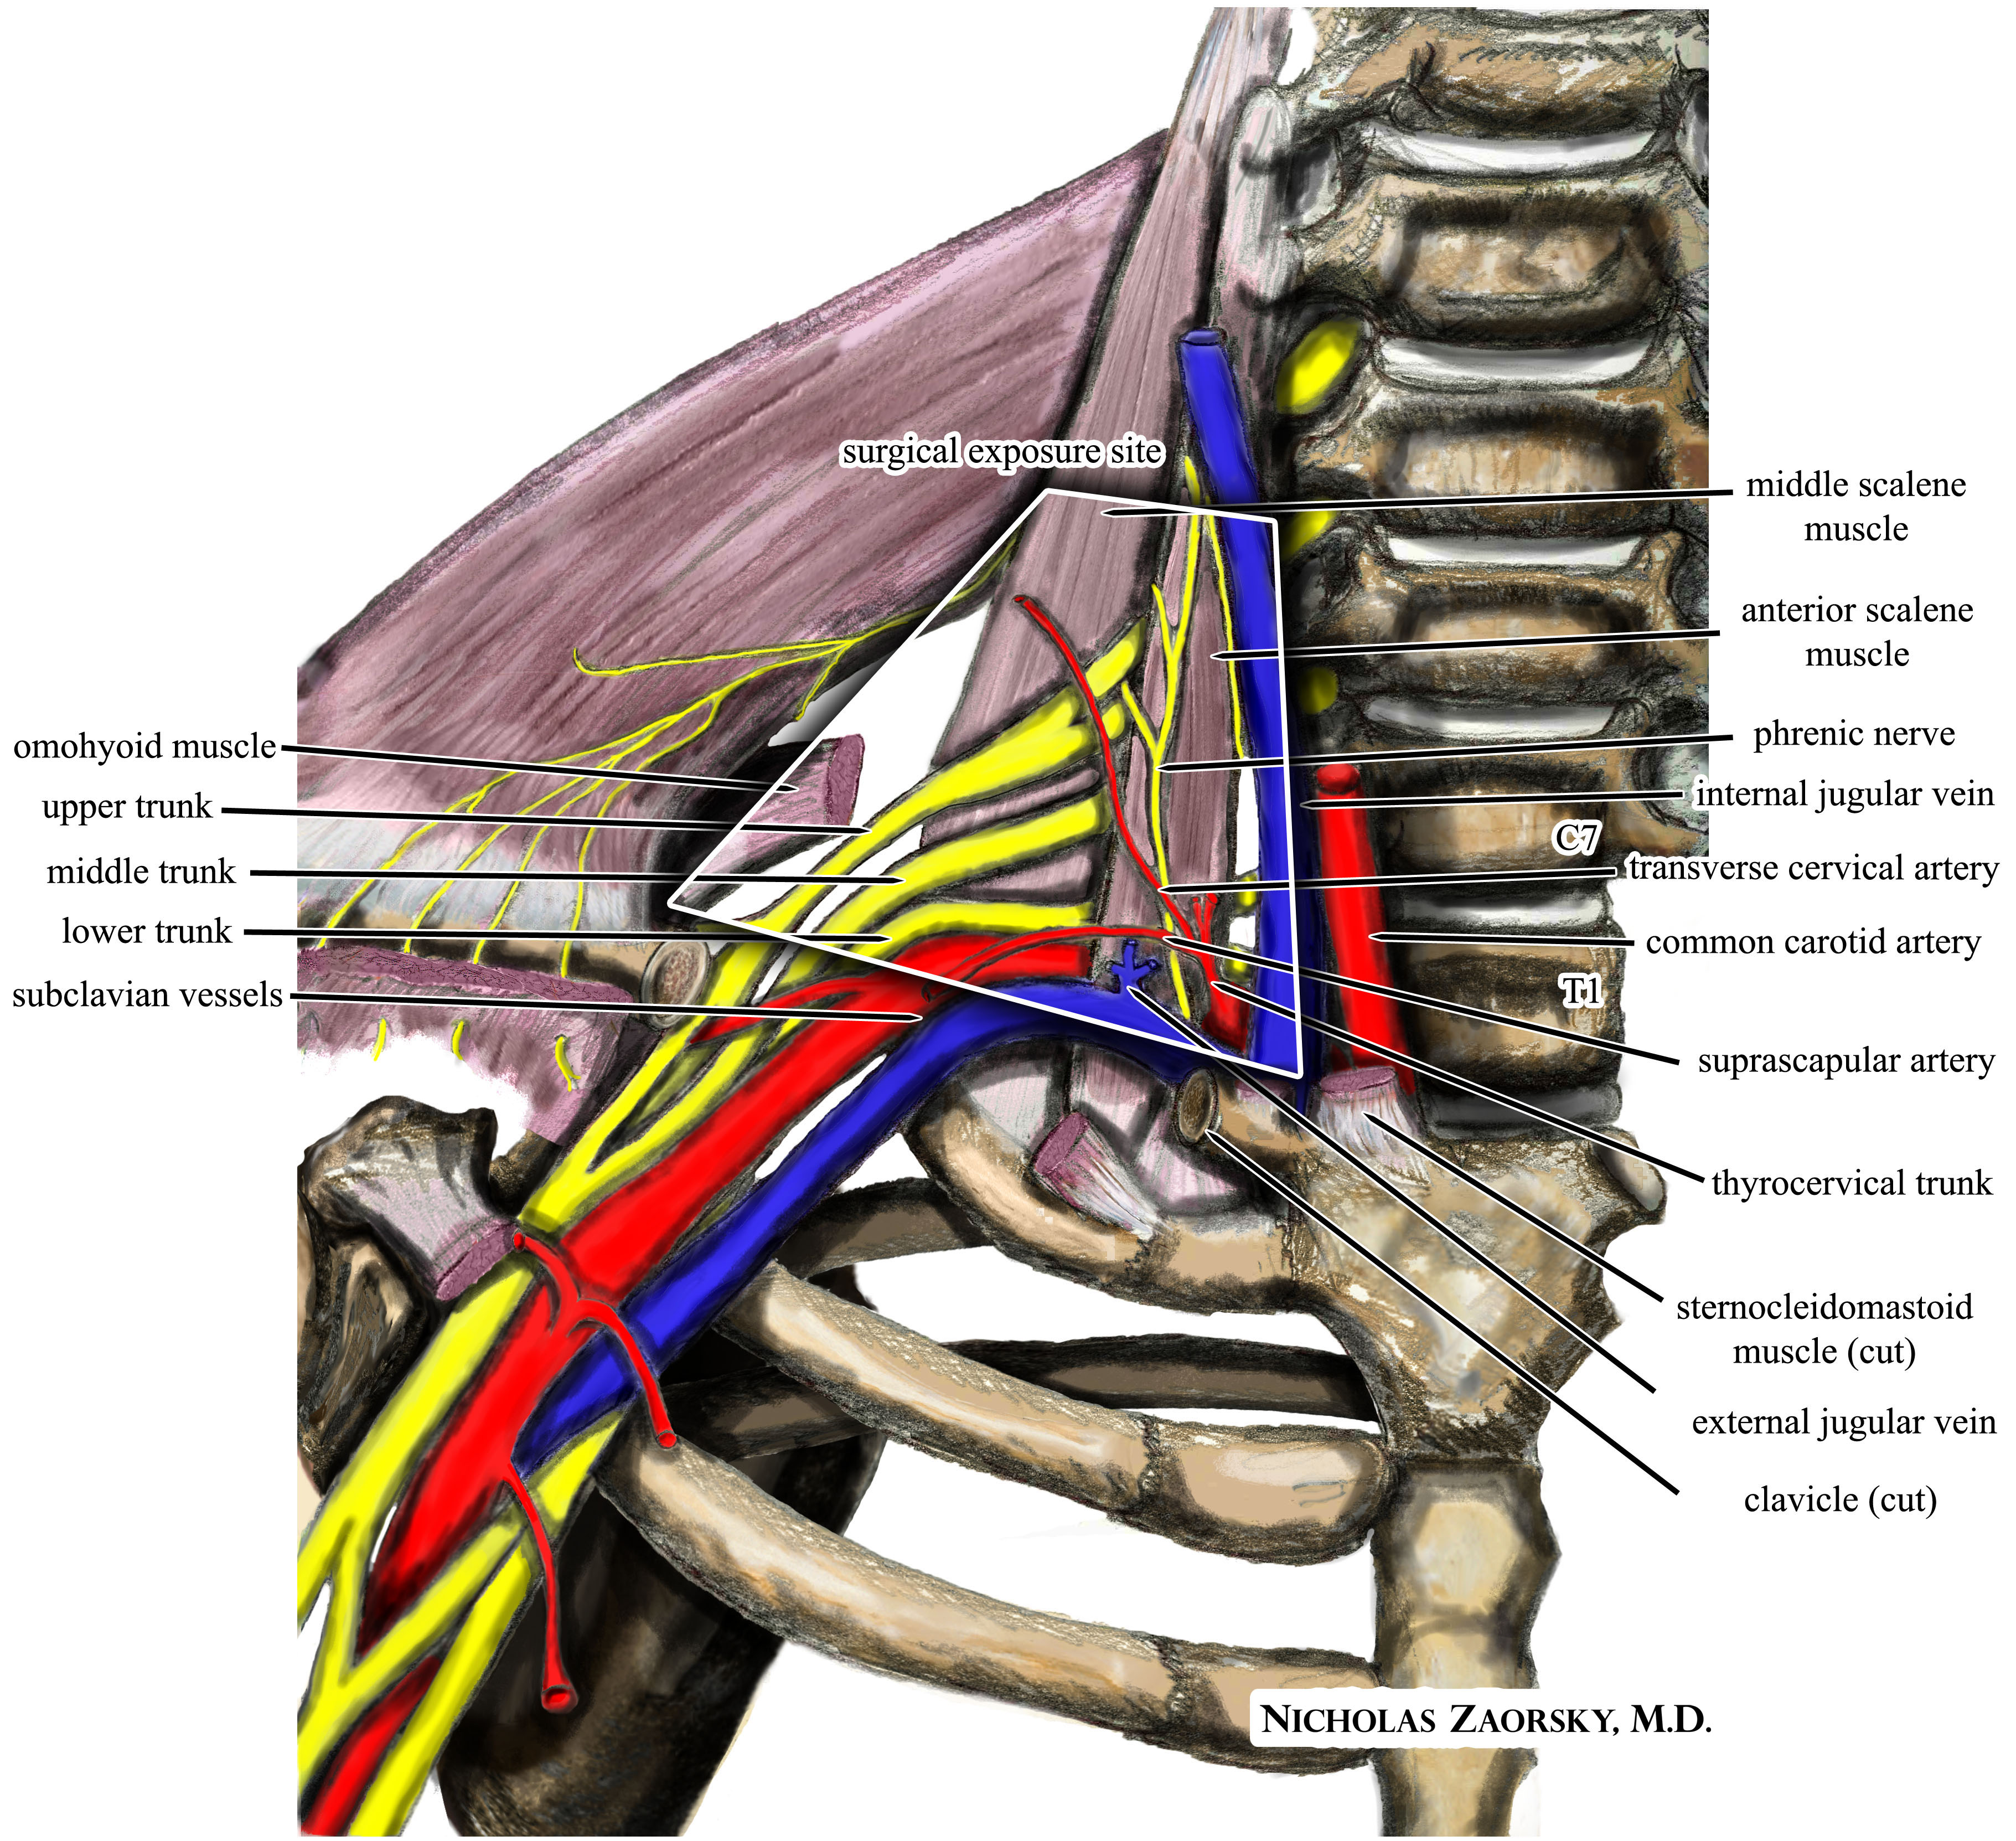 Thoracic outletinlet-Syndrom